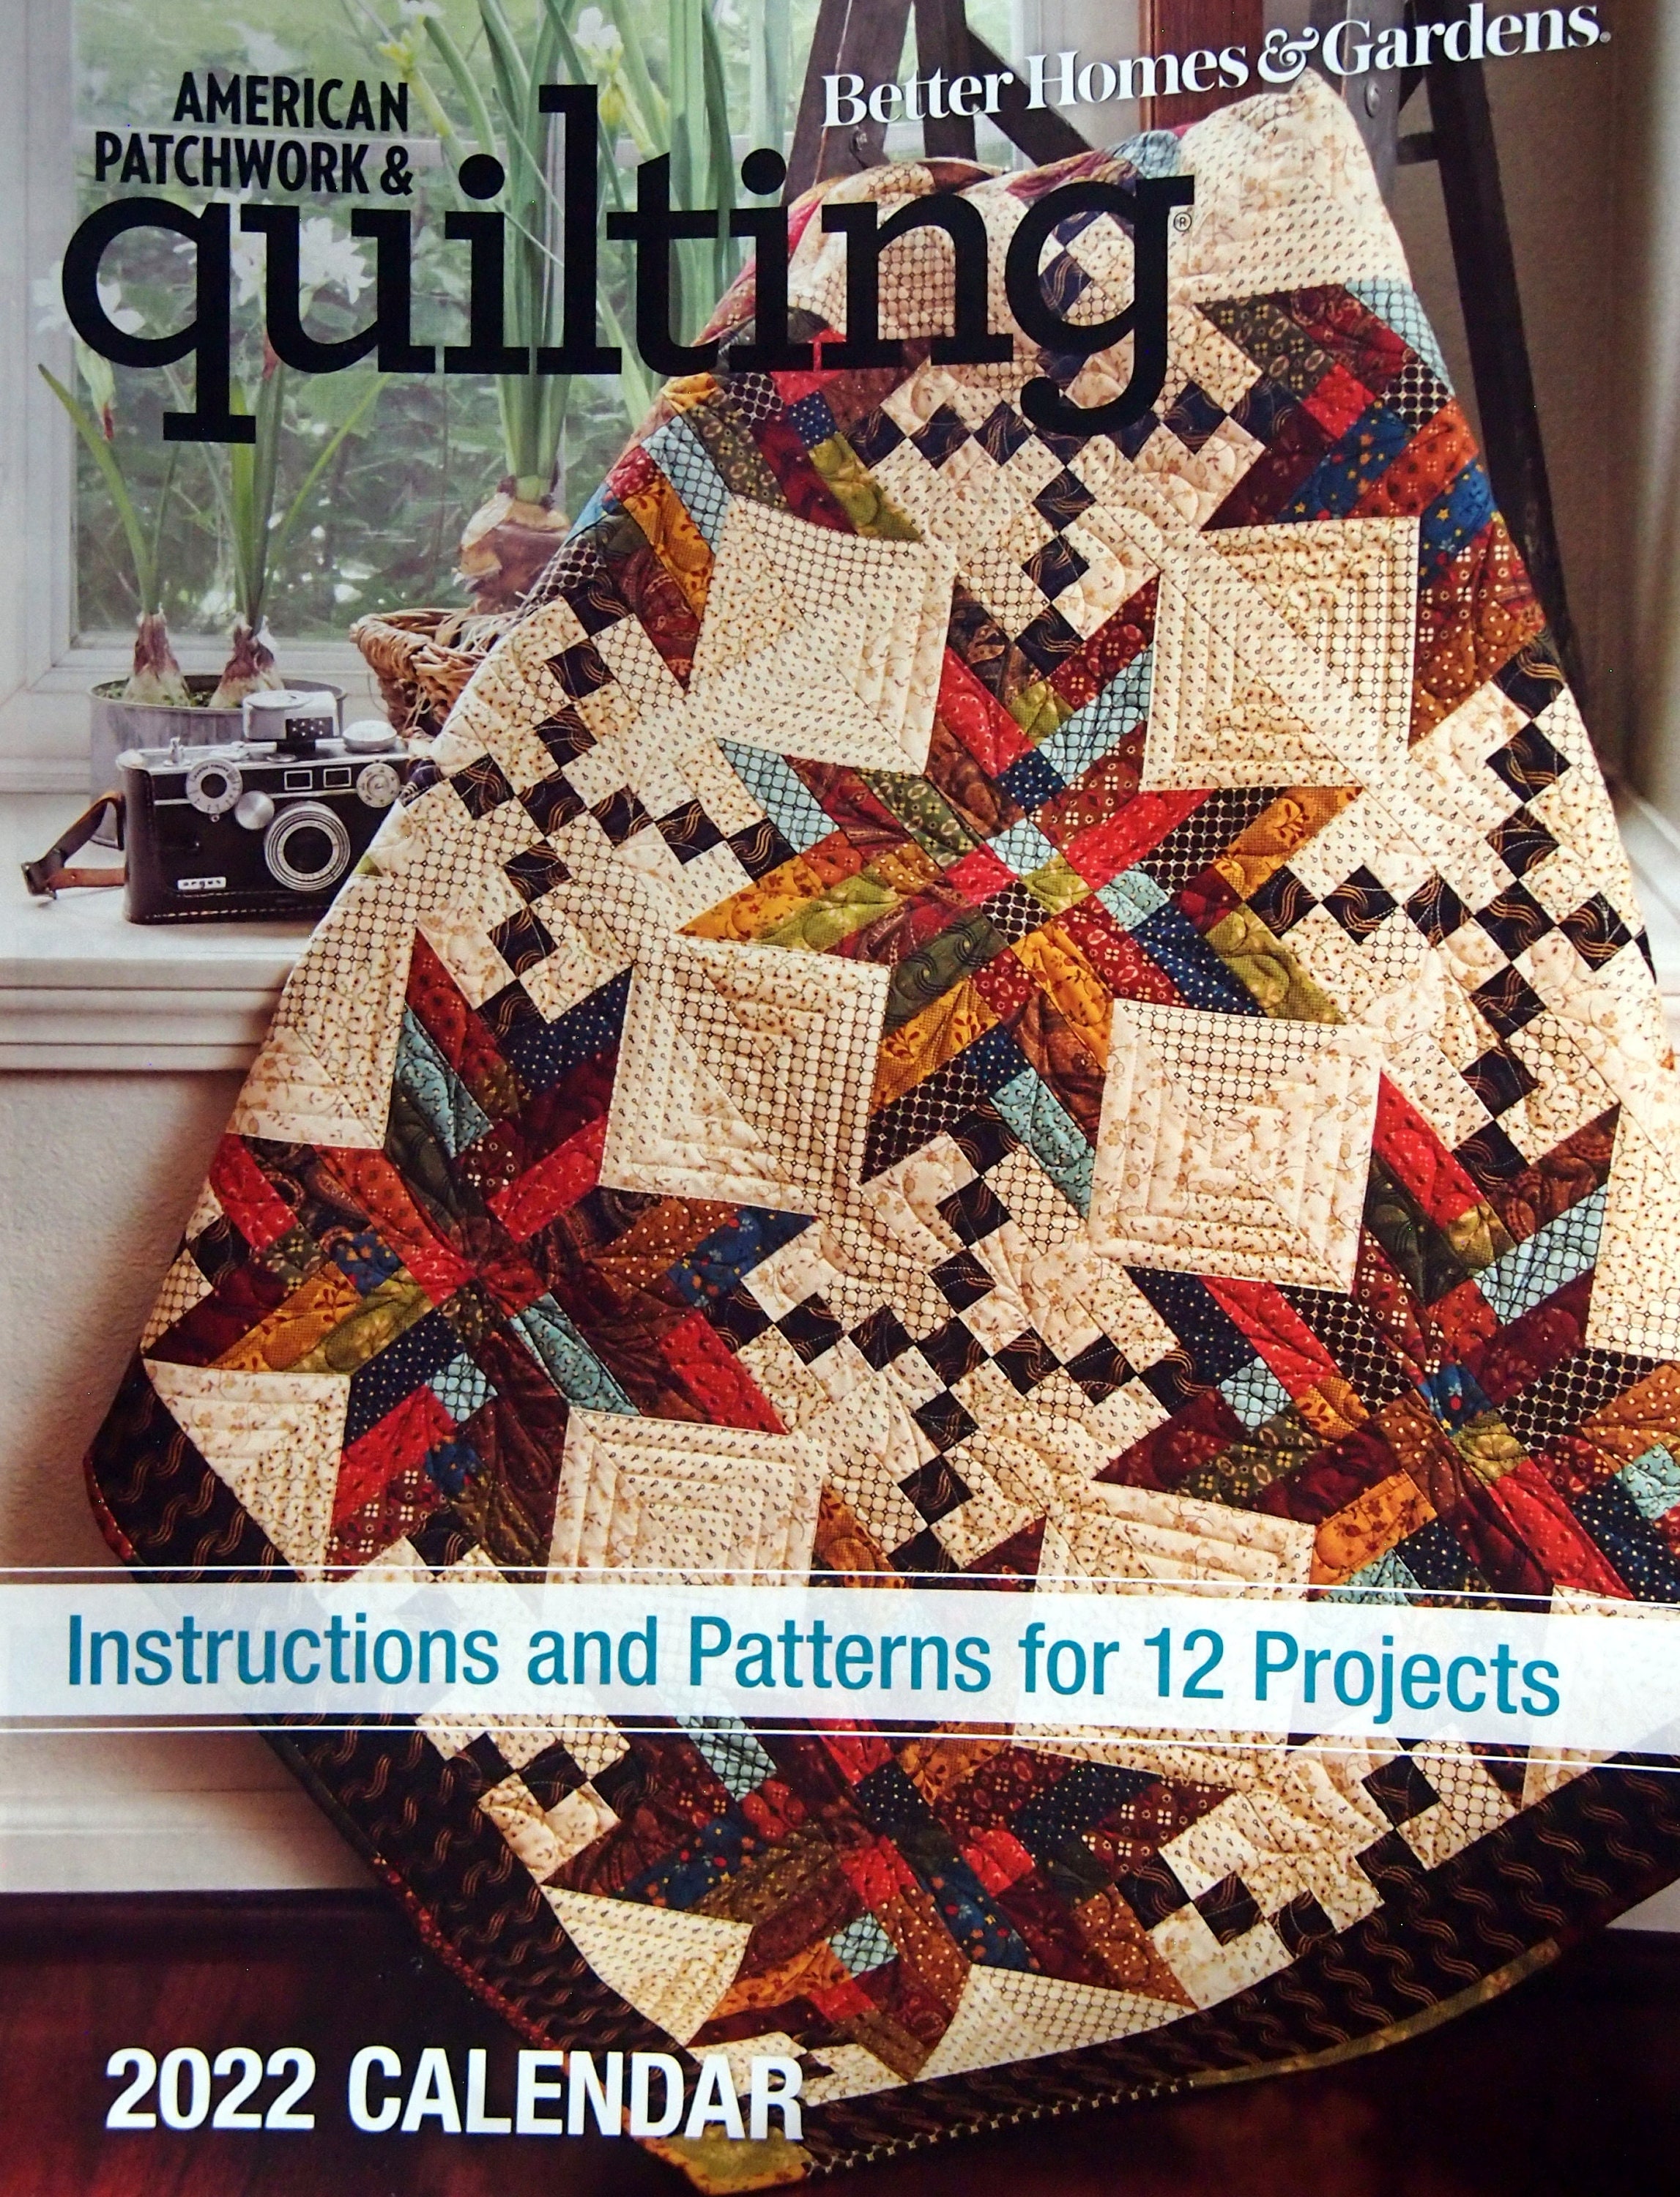 American Patchwork & Quilting 2013 Calendar Booklet by Better